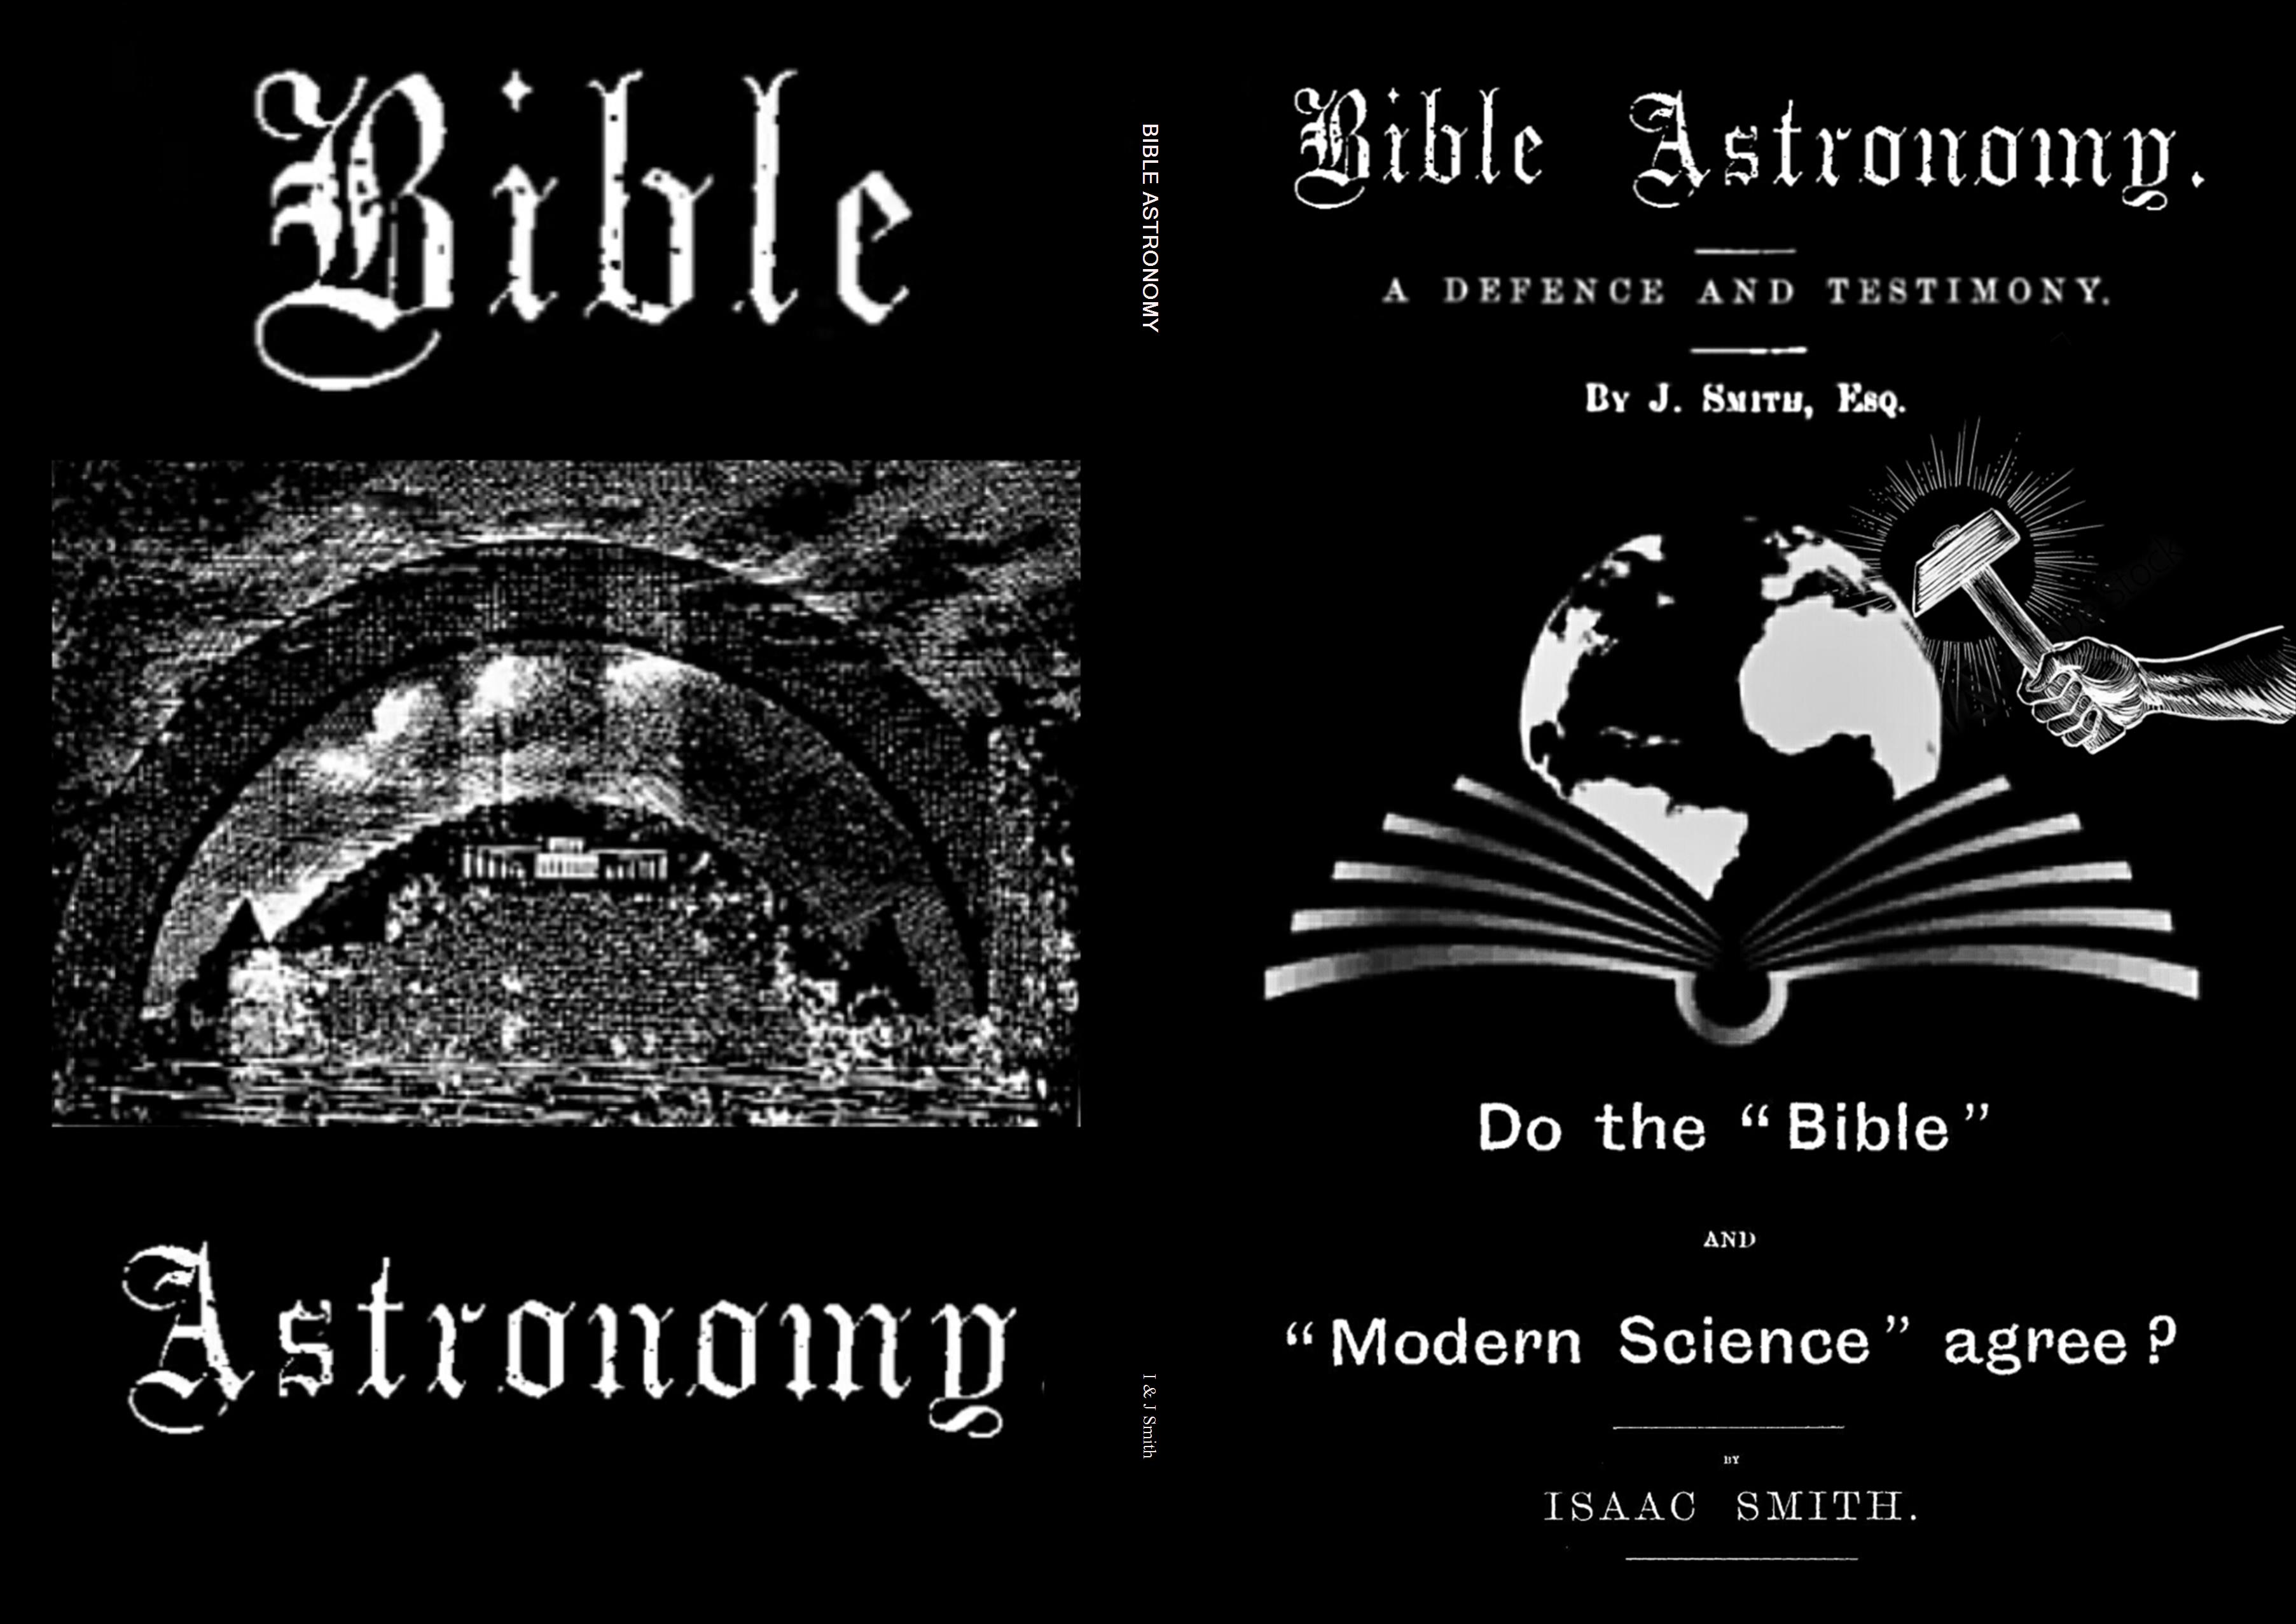 Bible Astronomy: The Smith Brothers cover image